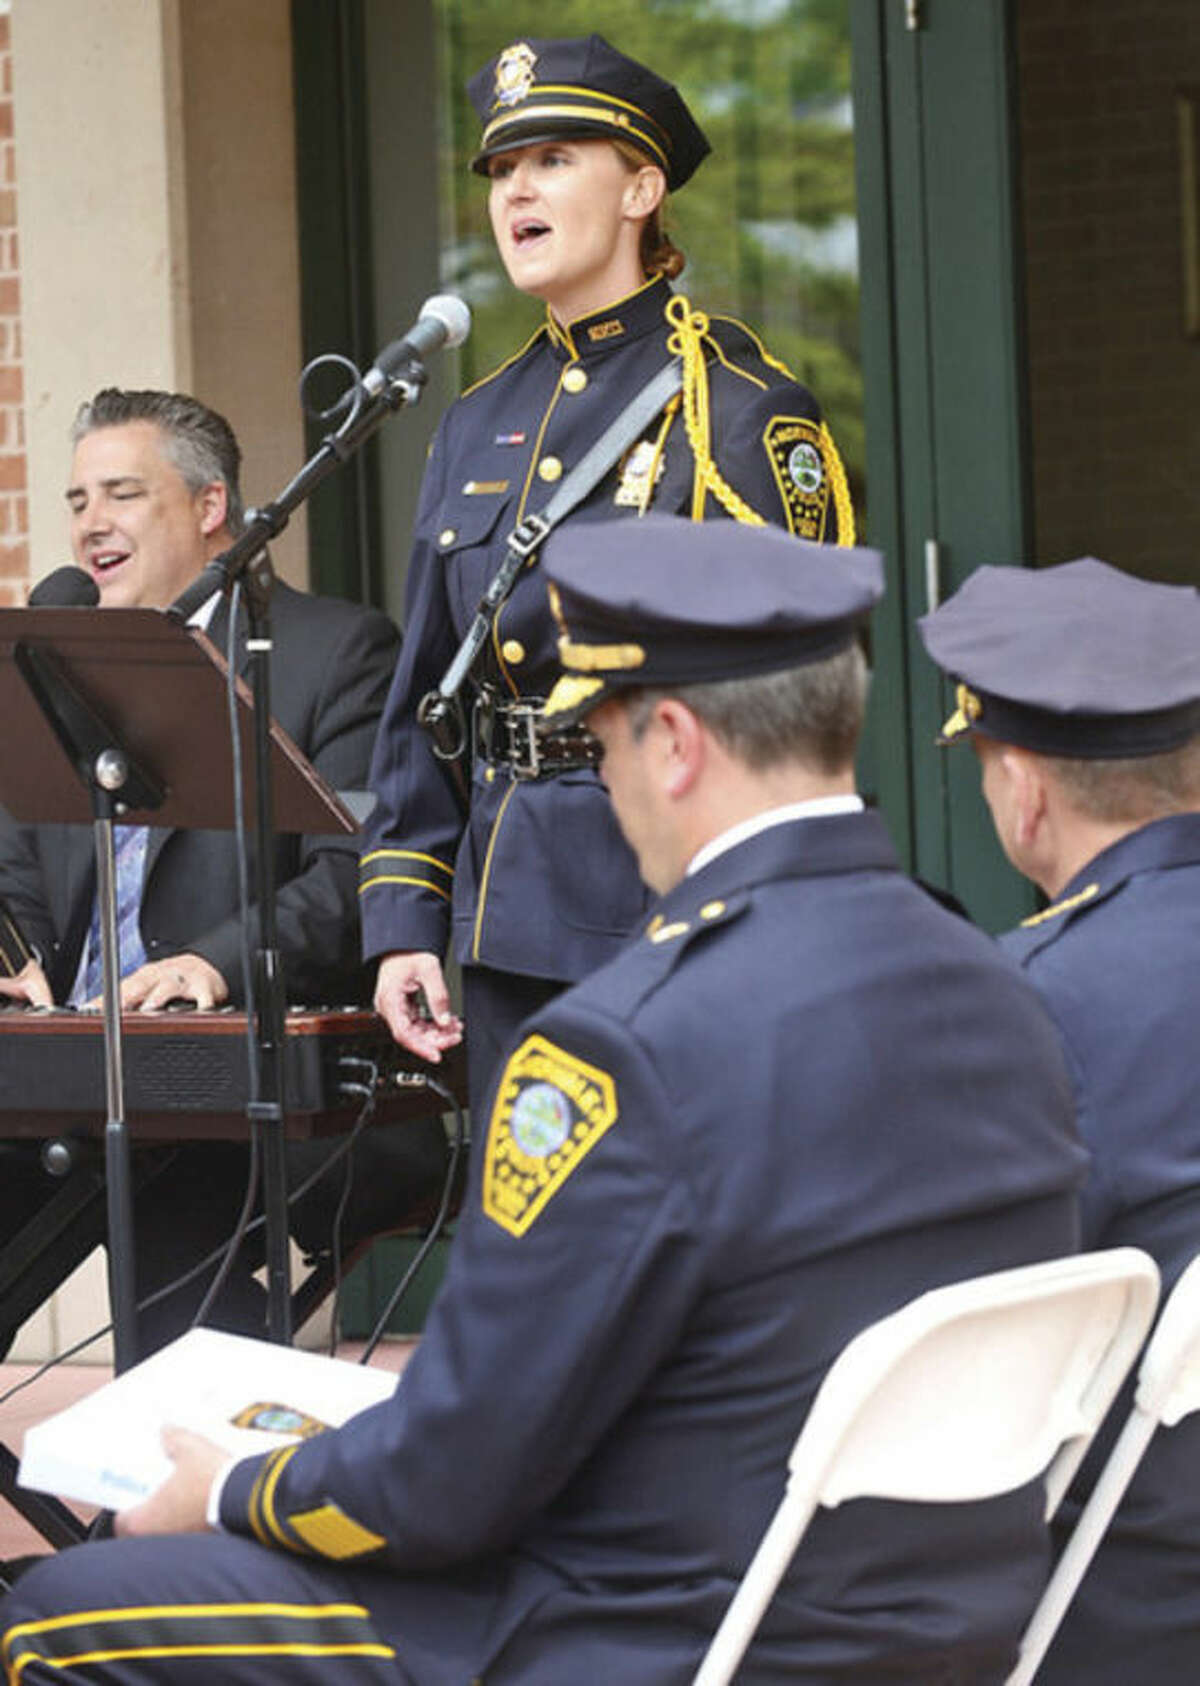 Norwalk police detective Kristina LaPak and David harris sing "The Prayer" as police and residents commemorate the officers who died in the line of duty during the Norwalk Department of Police Services annual Police Memorial Service Friday. Hour photo / Erik Trautmann